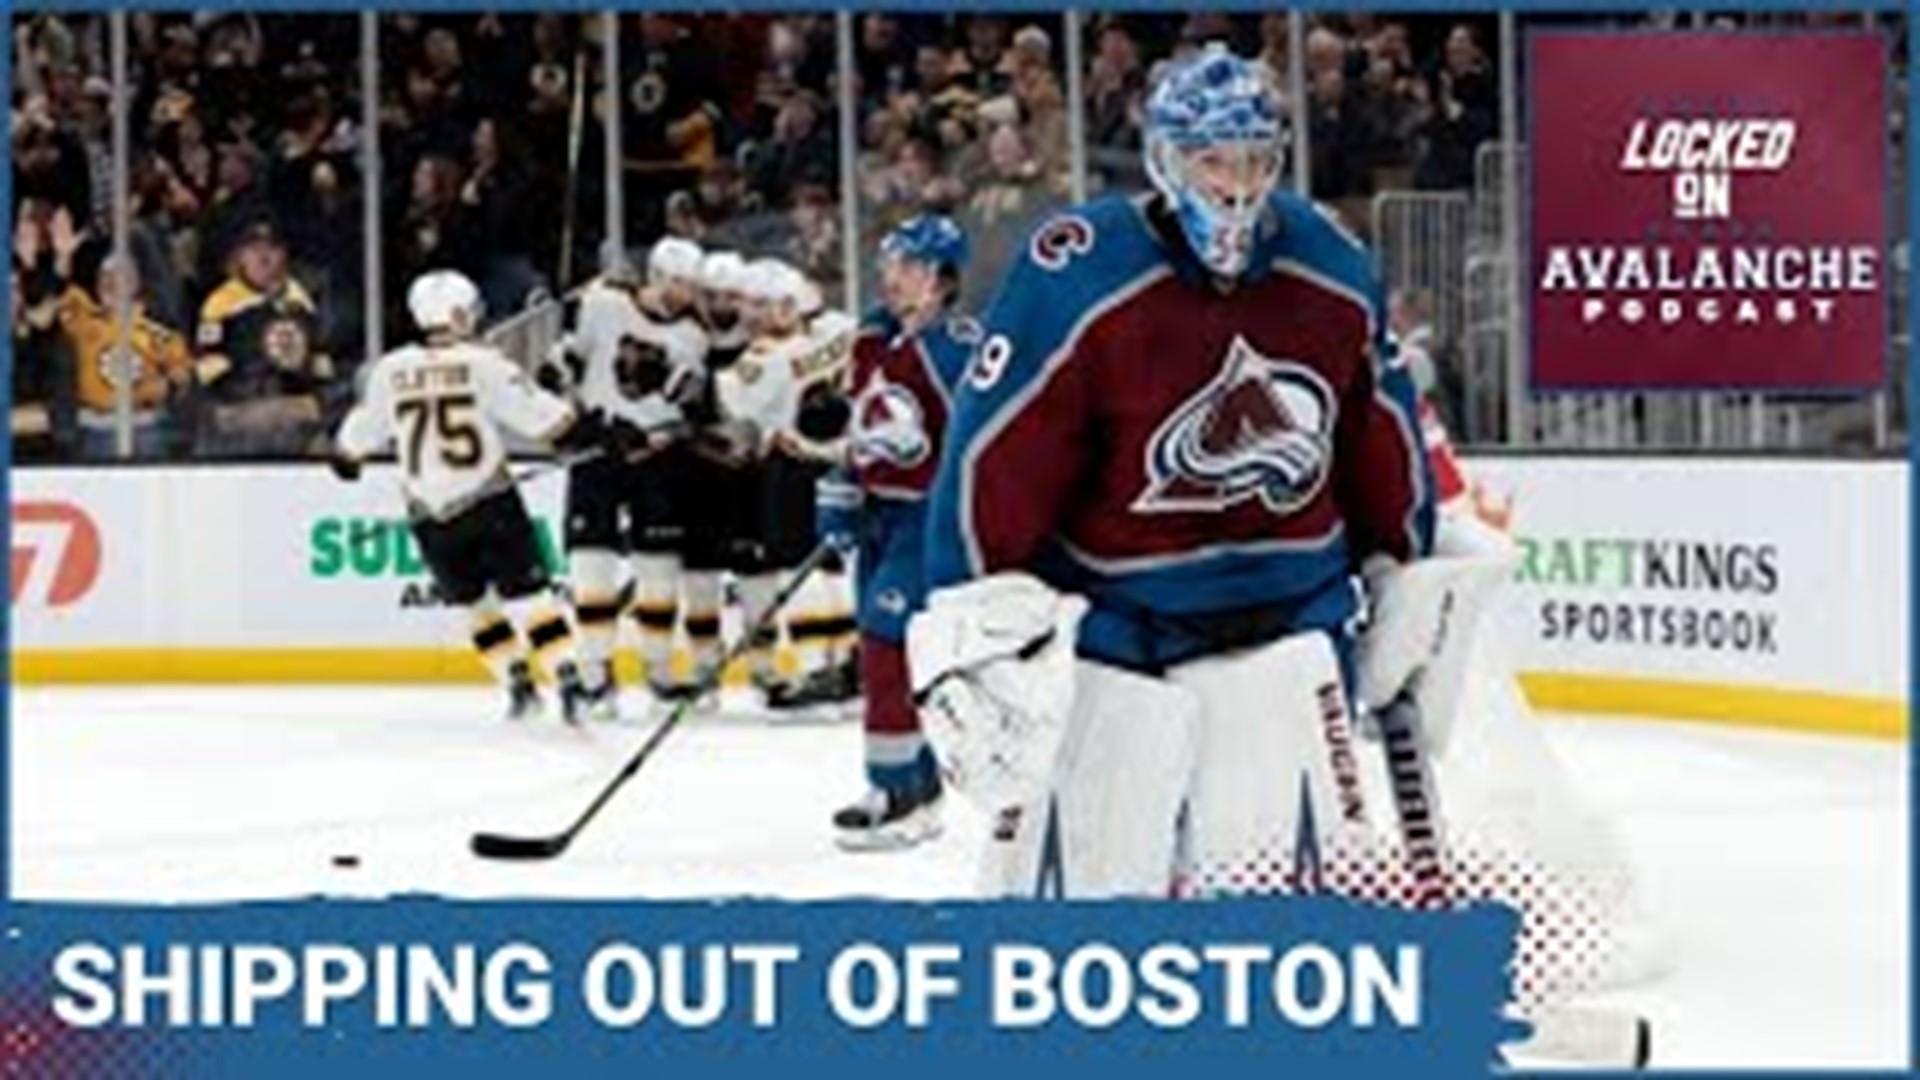 Lehkonen is the latest addition to the injury list as the Avalanche lose to  the Bruins | Locked on Avalanche Podcast 